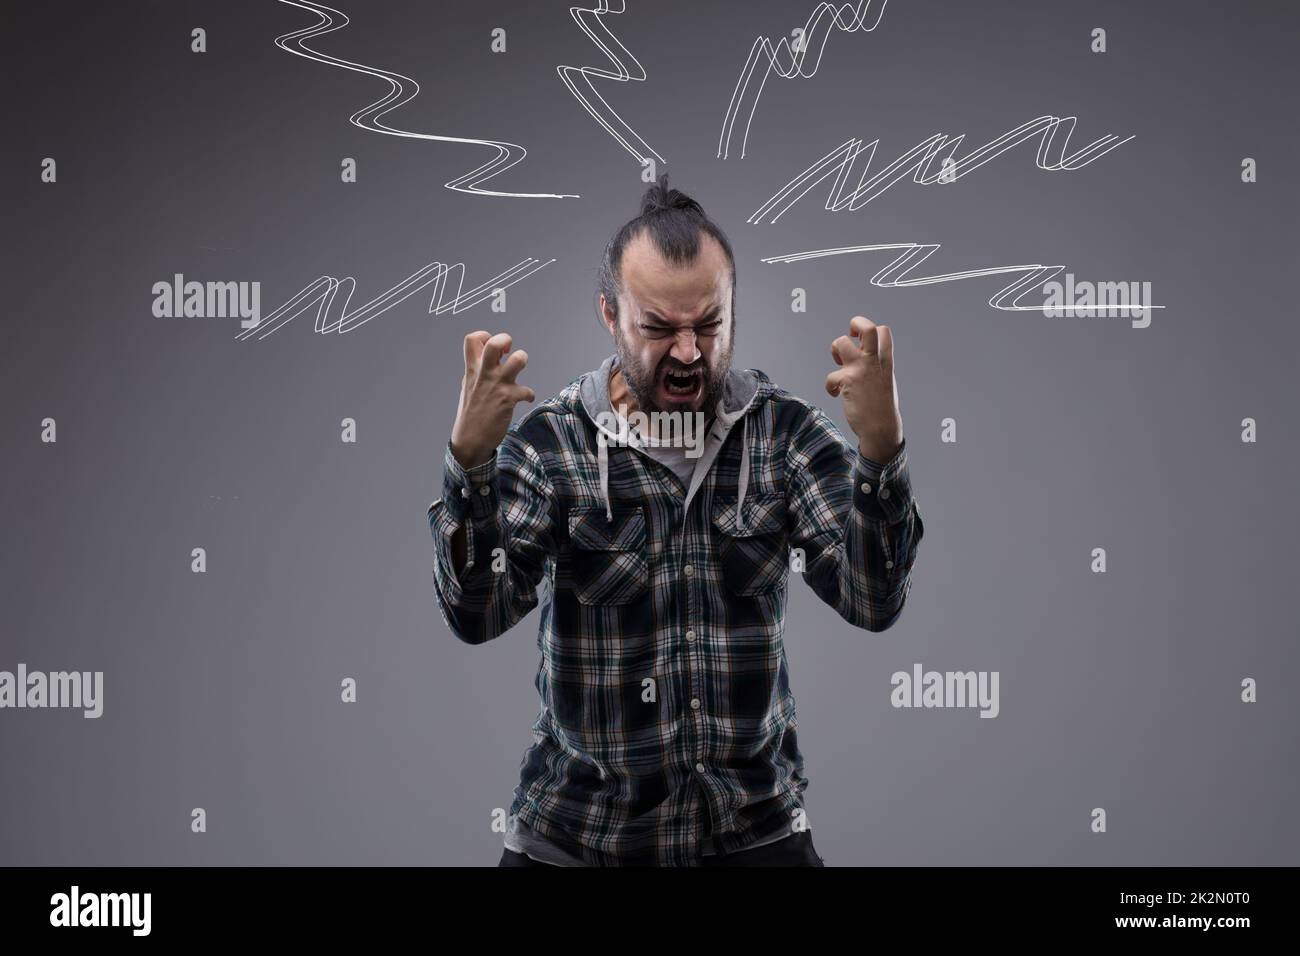 Man yelling and screaming with rage Stock Photo